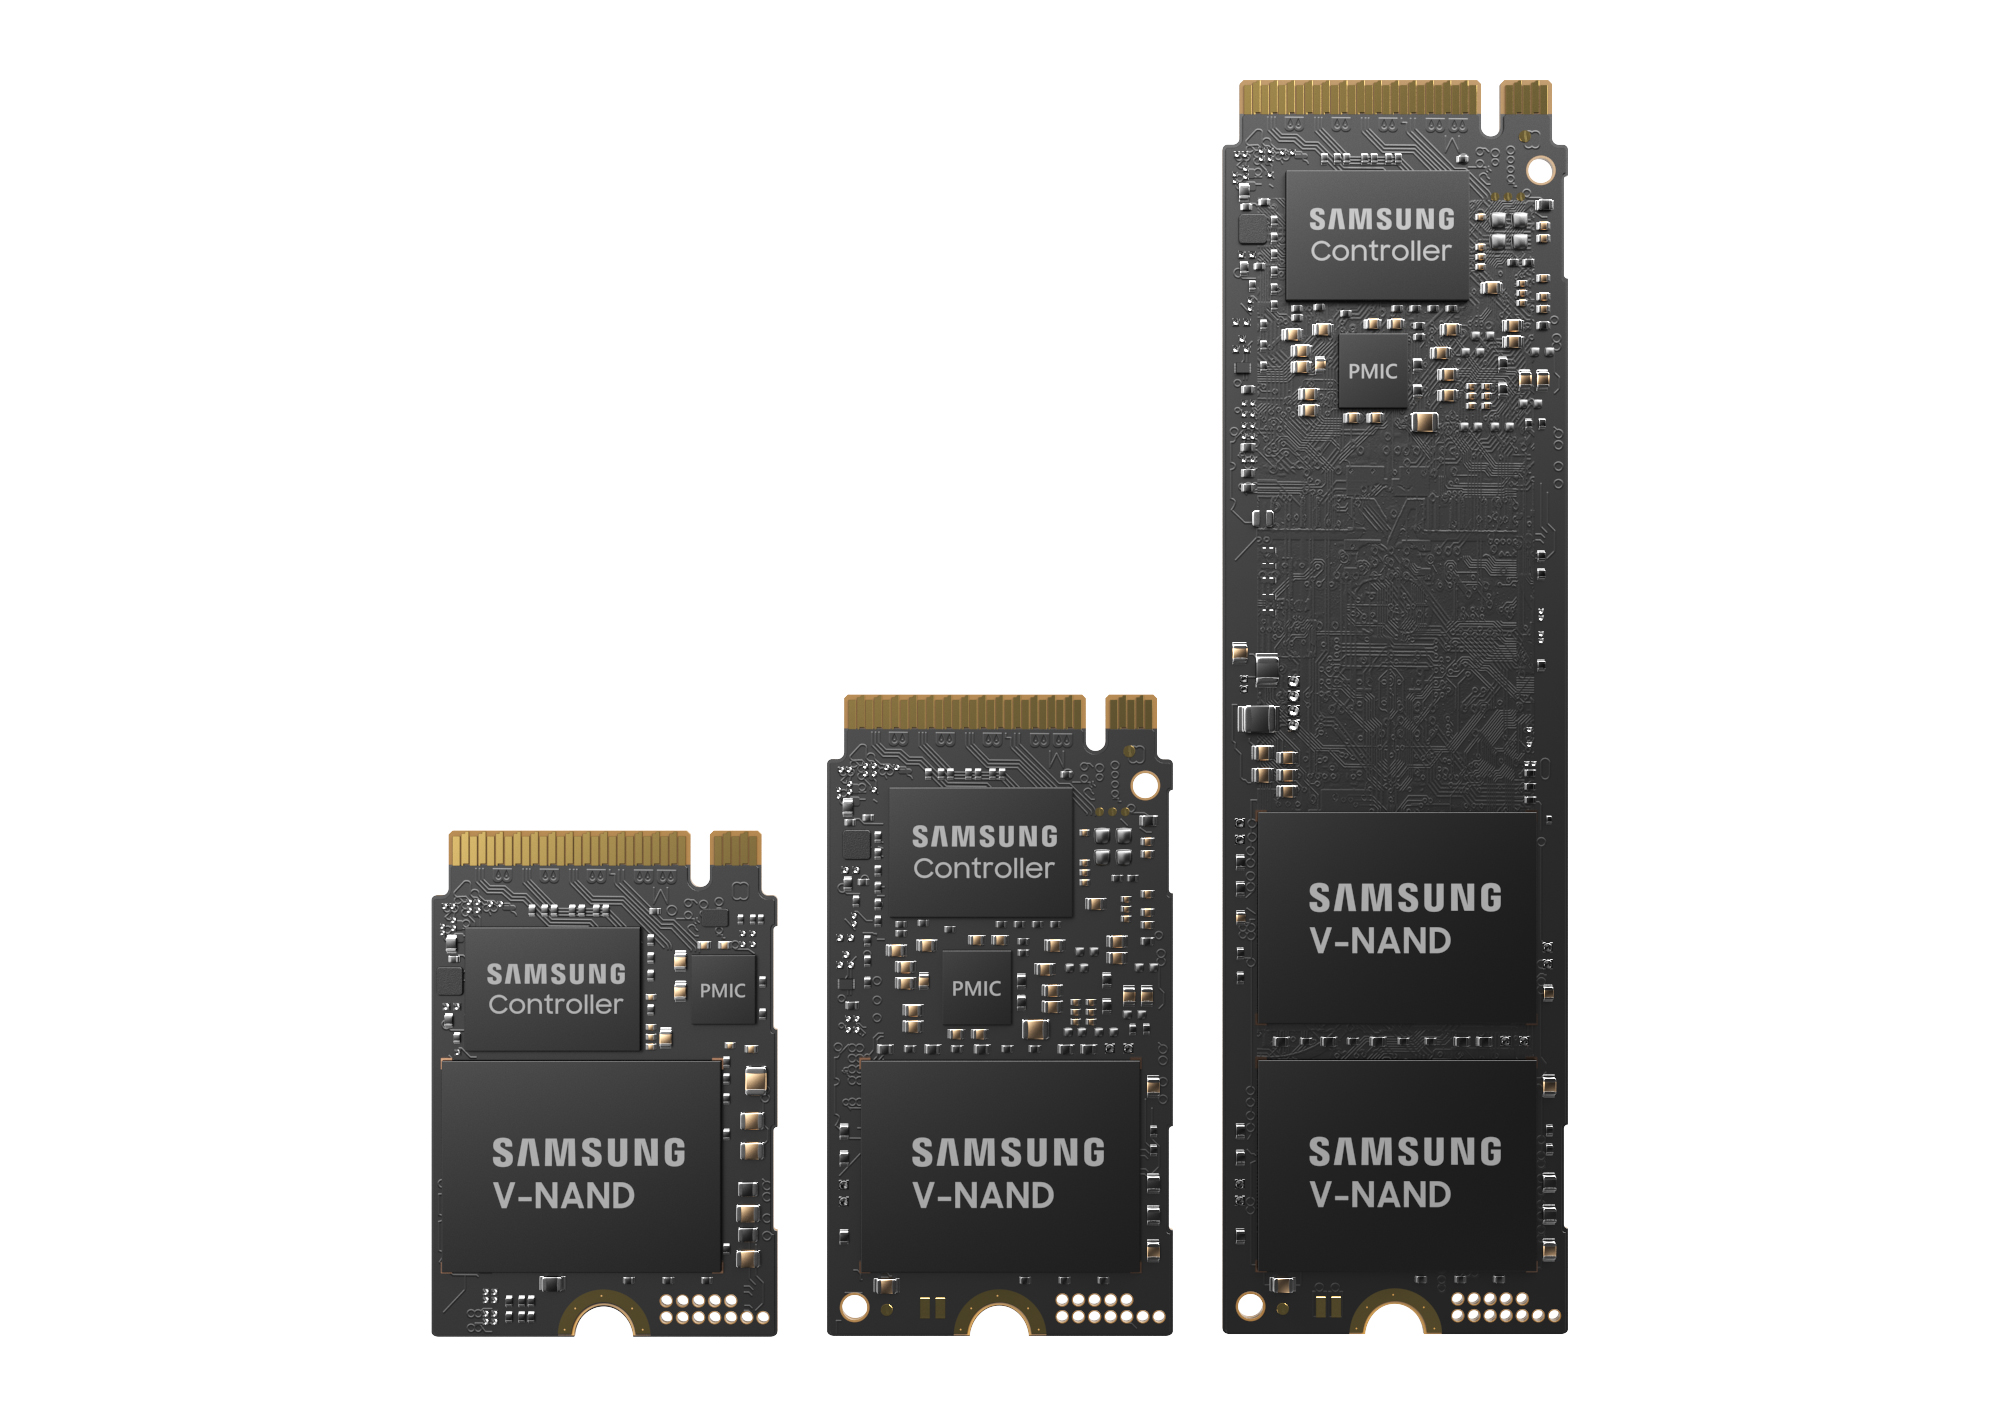 Samsung's new SSD provides elevated computing and gaming performance in PCs/laptops